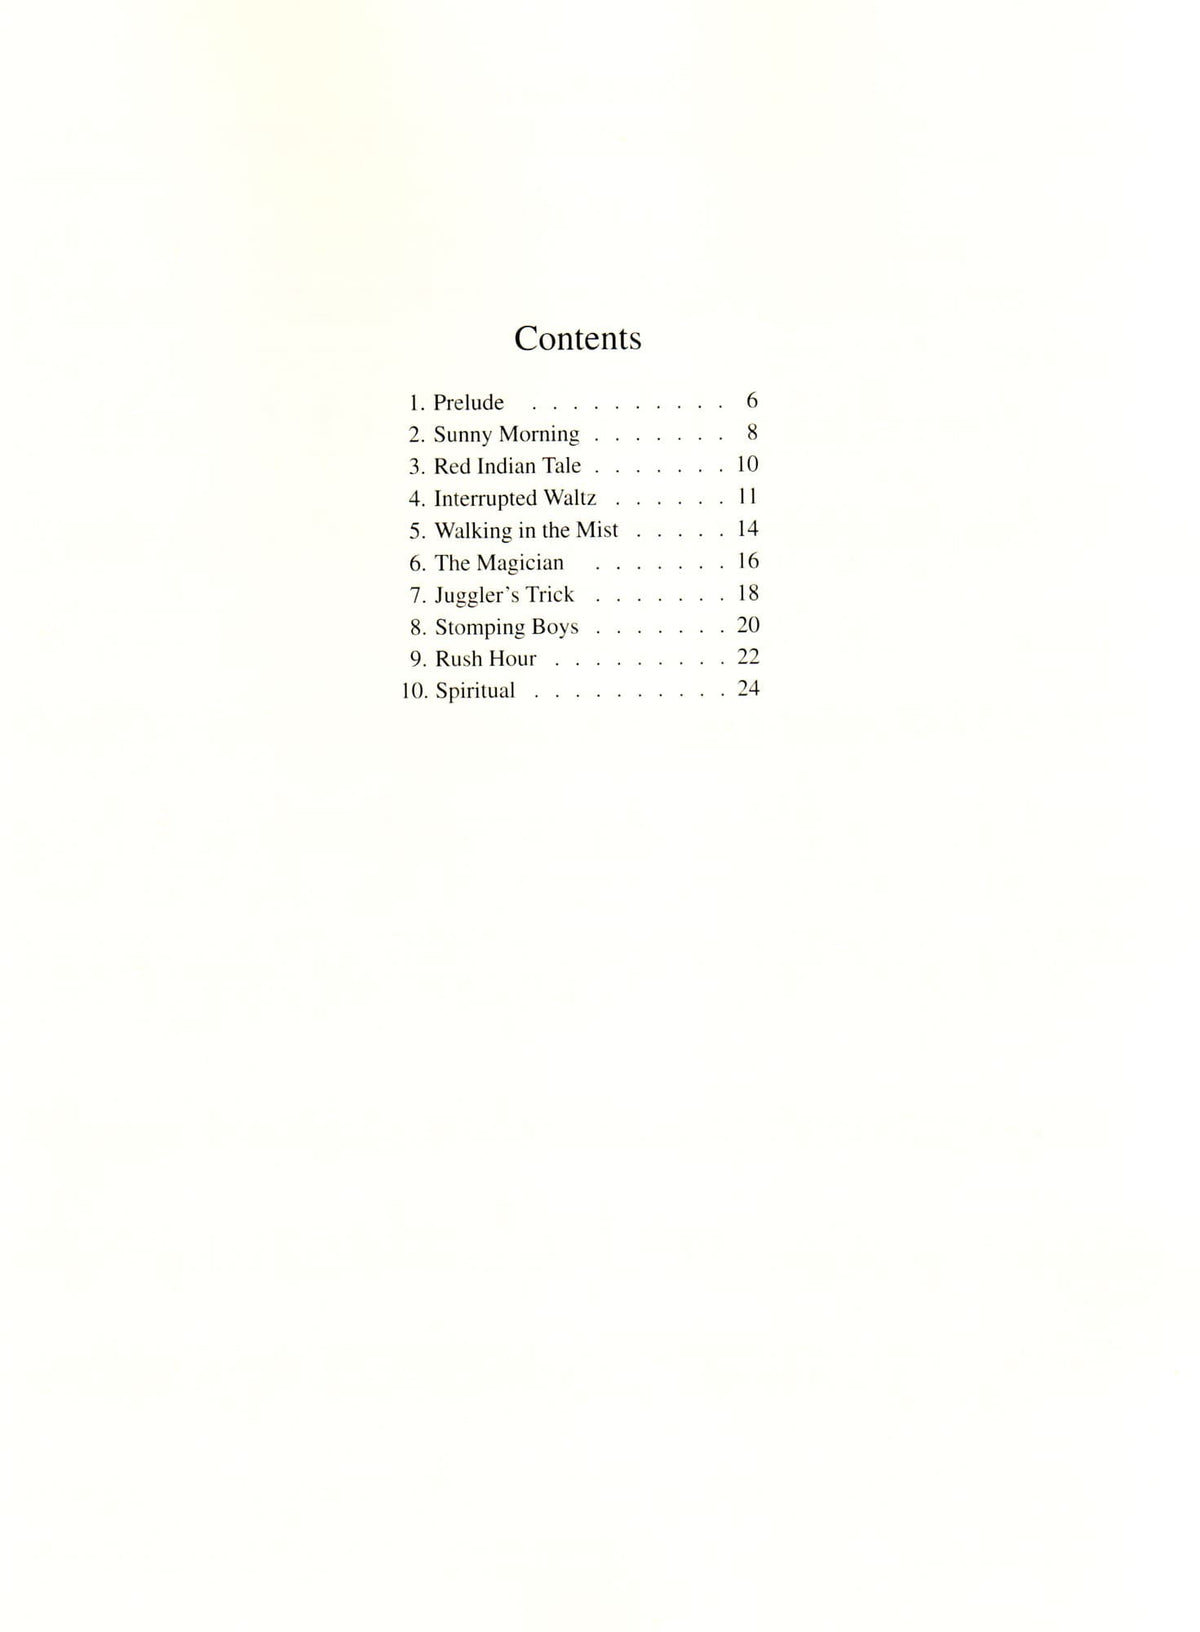 Putz, Eduard - Short Stories: 10 Little Pieces for Cello and Piano - Published by Schott Music